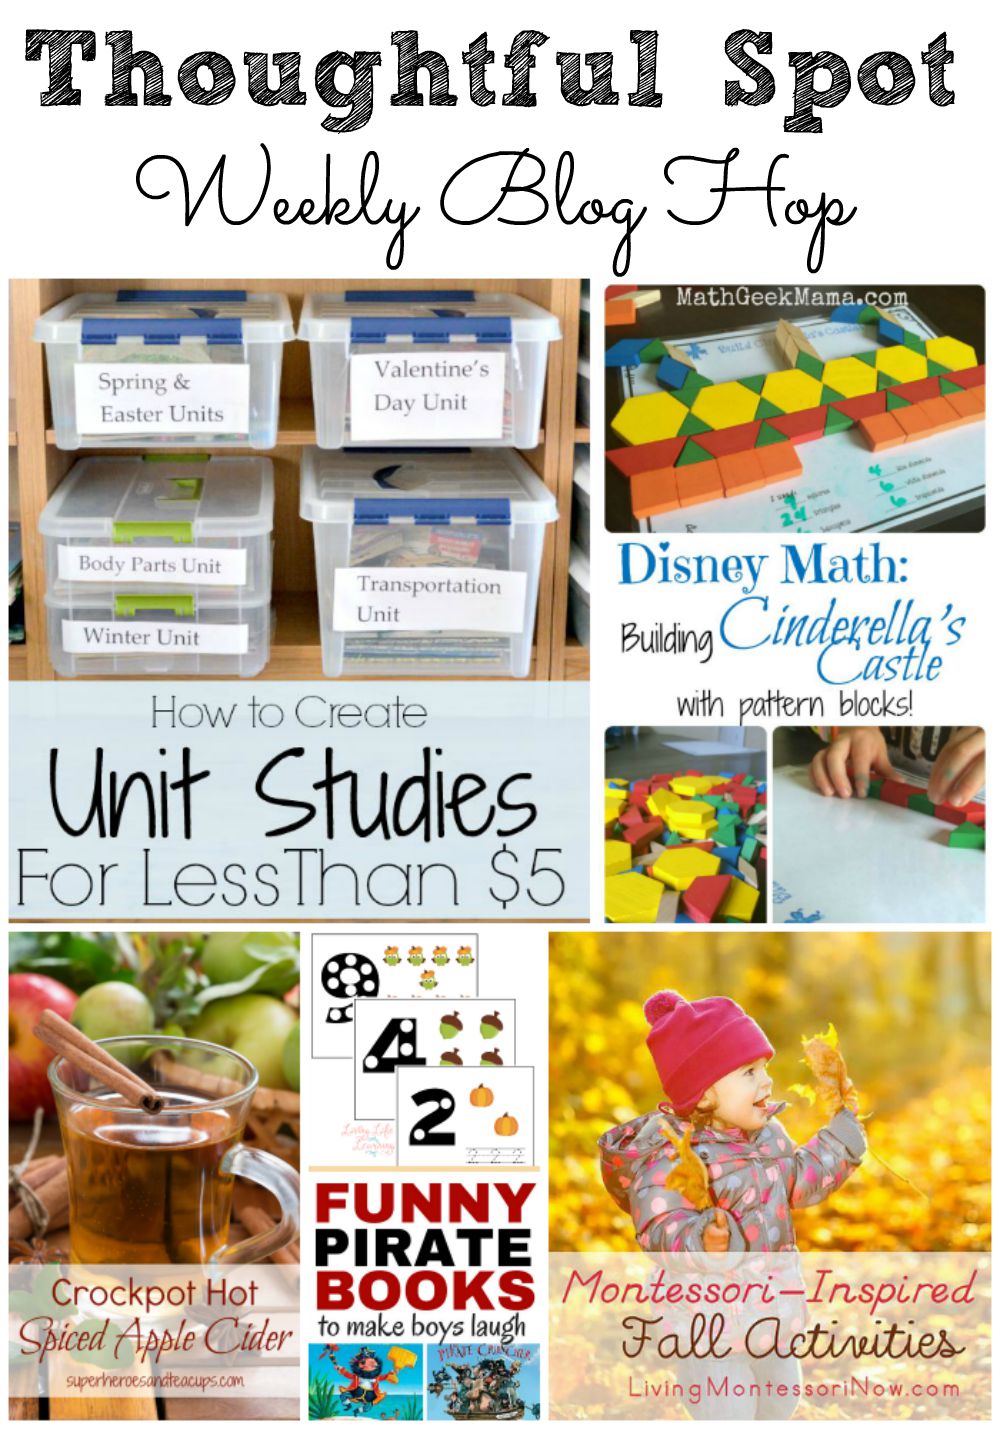 Thoughtful Spot Weekly Blog Hop where you will find the best family friendly recipes, crafts, DIY's, Homeschooling Ideas and Parenting Advice